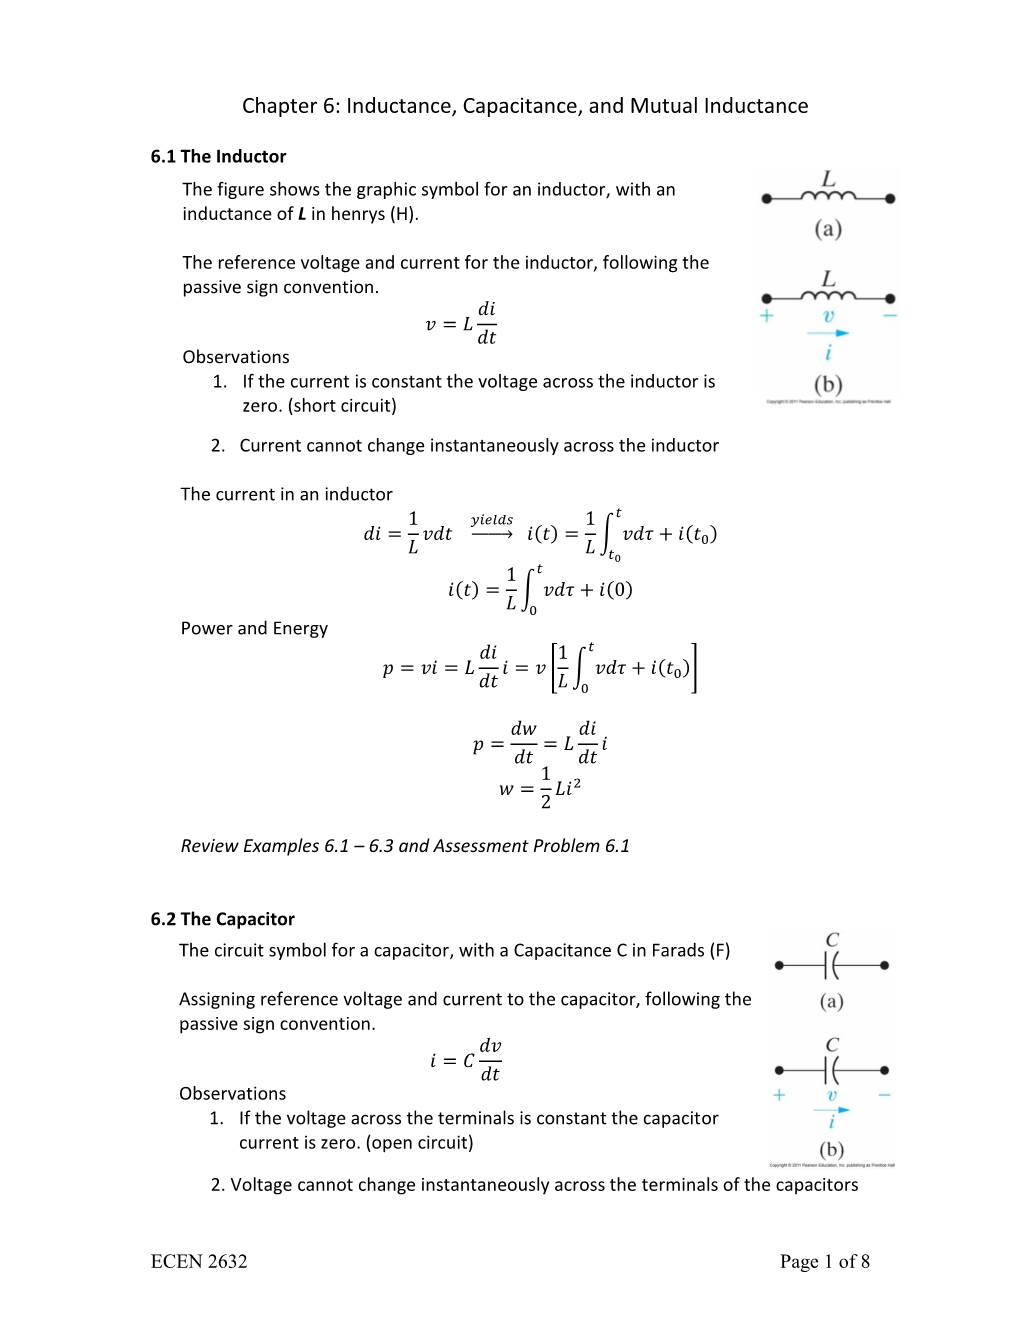 Chapter 6: Inductance, Capacitance, and Mutual Inductance